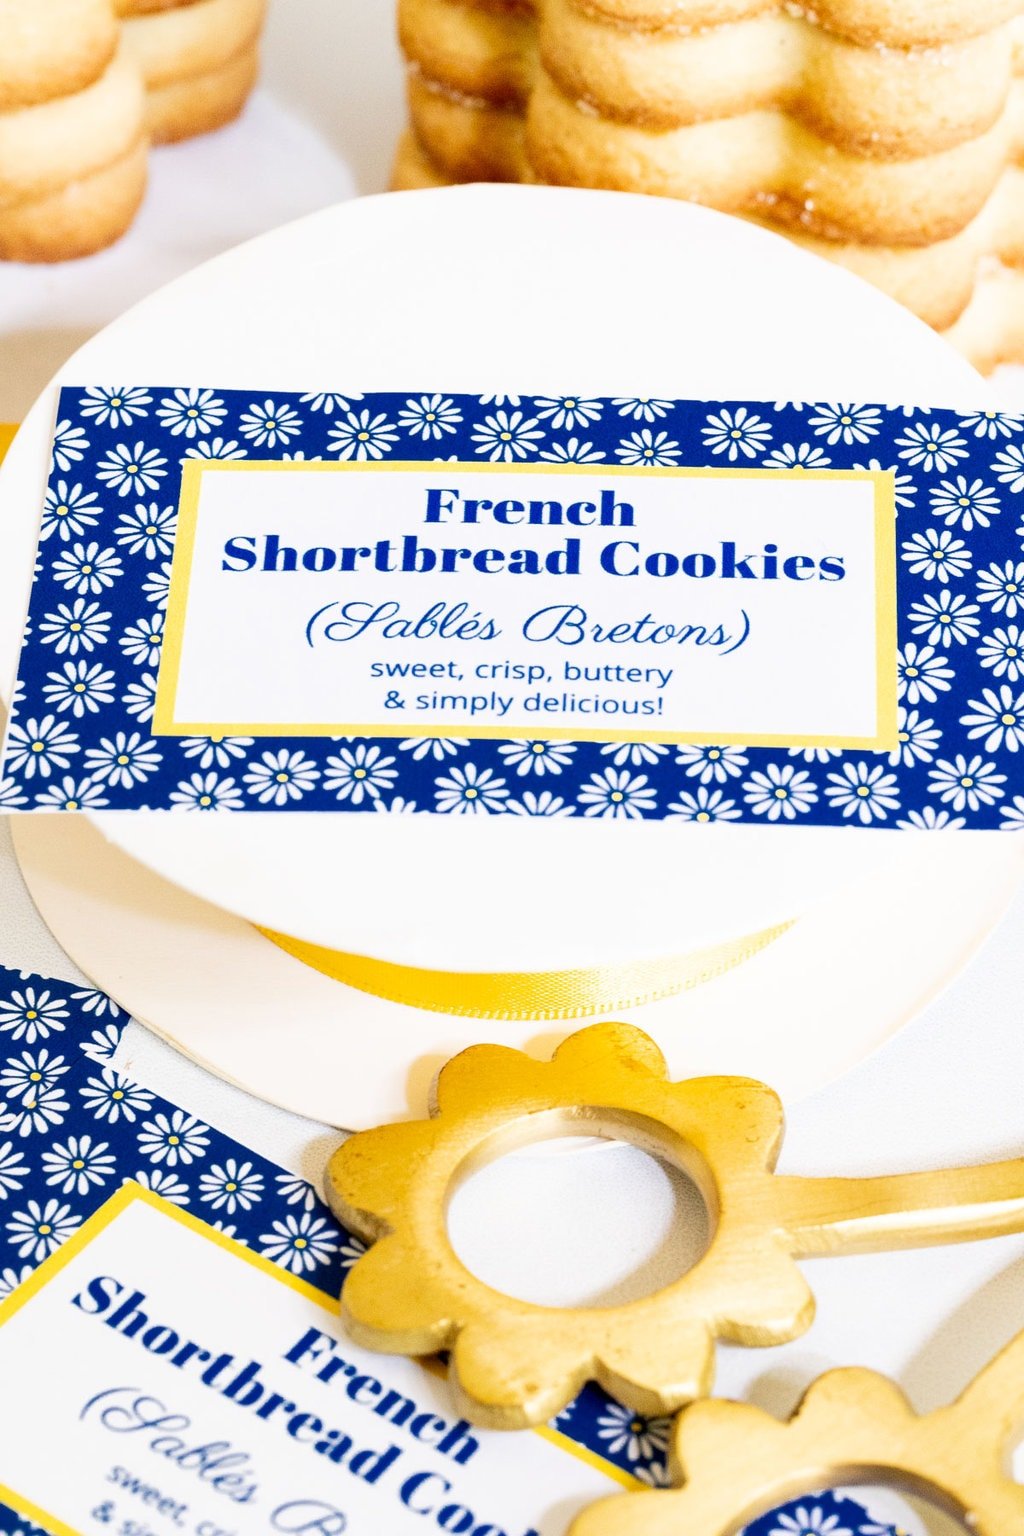 Vertical closeup photo of French Shortbread Cookies (Sablés Bretons) labels for gifting purposes.